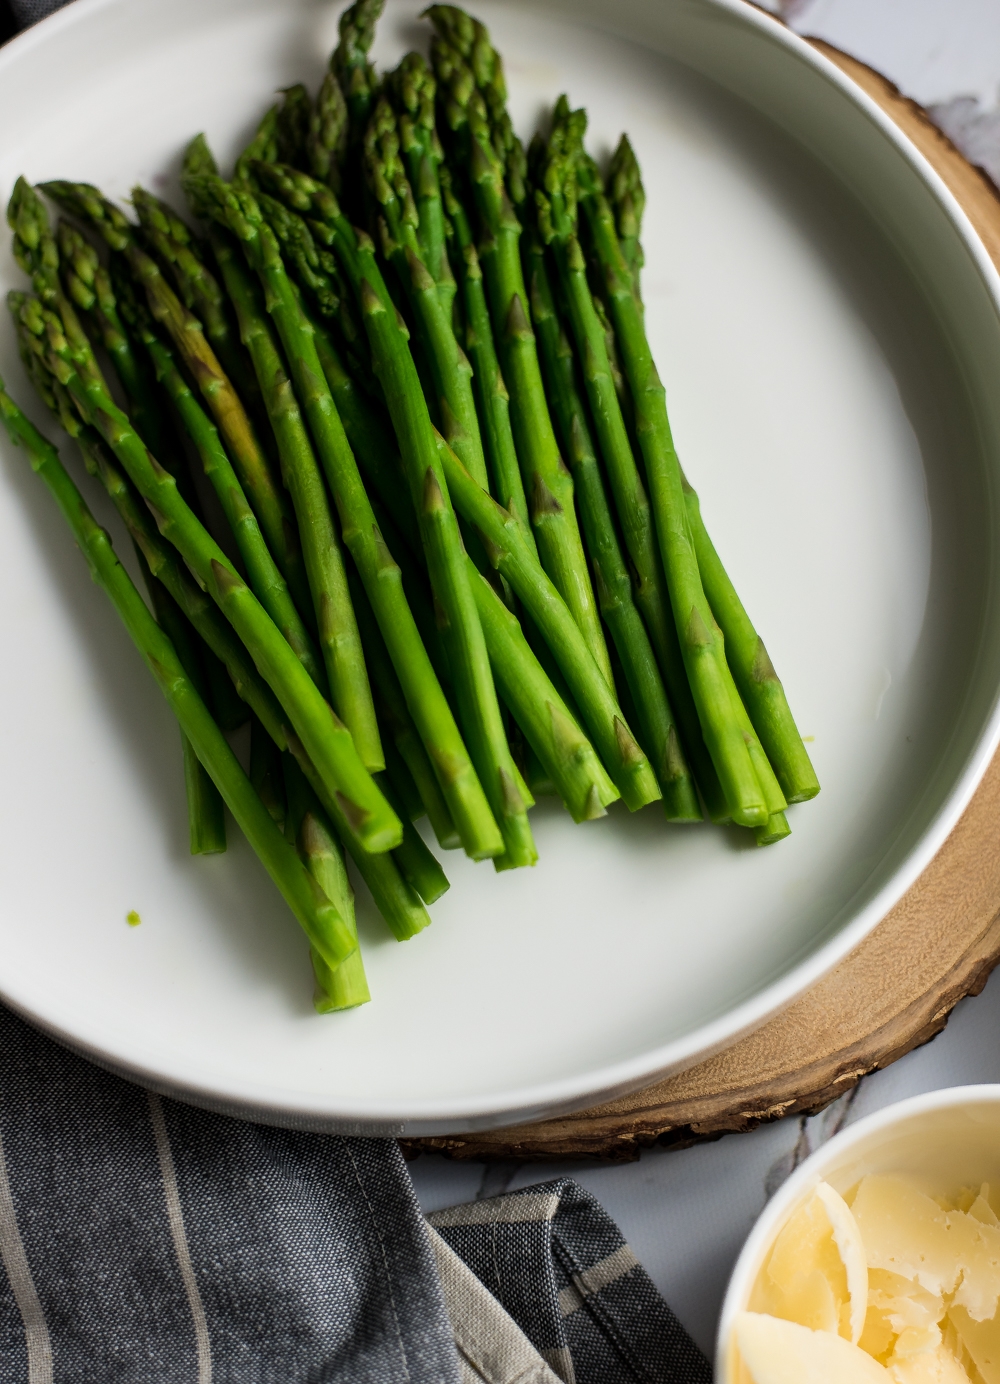 Steamed Asparagus with Ghee Béarnaise Sauce is the perfect side dish for Sunday dinner, especially Easter Sunday dinner! It's super simple and delicious!